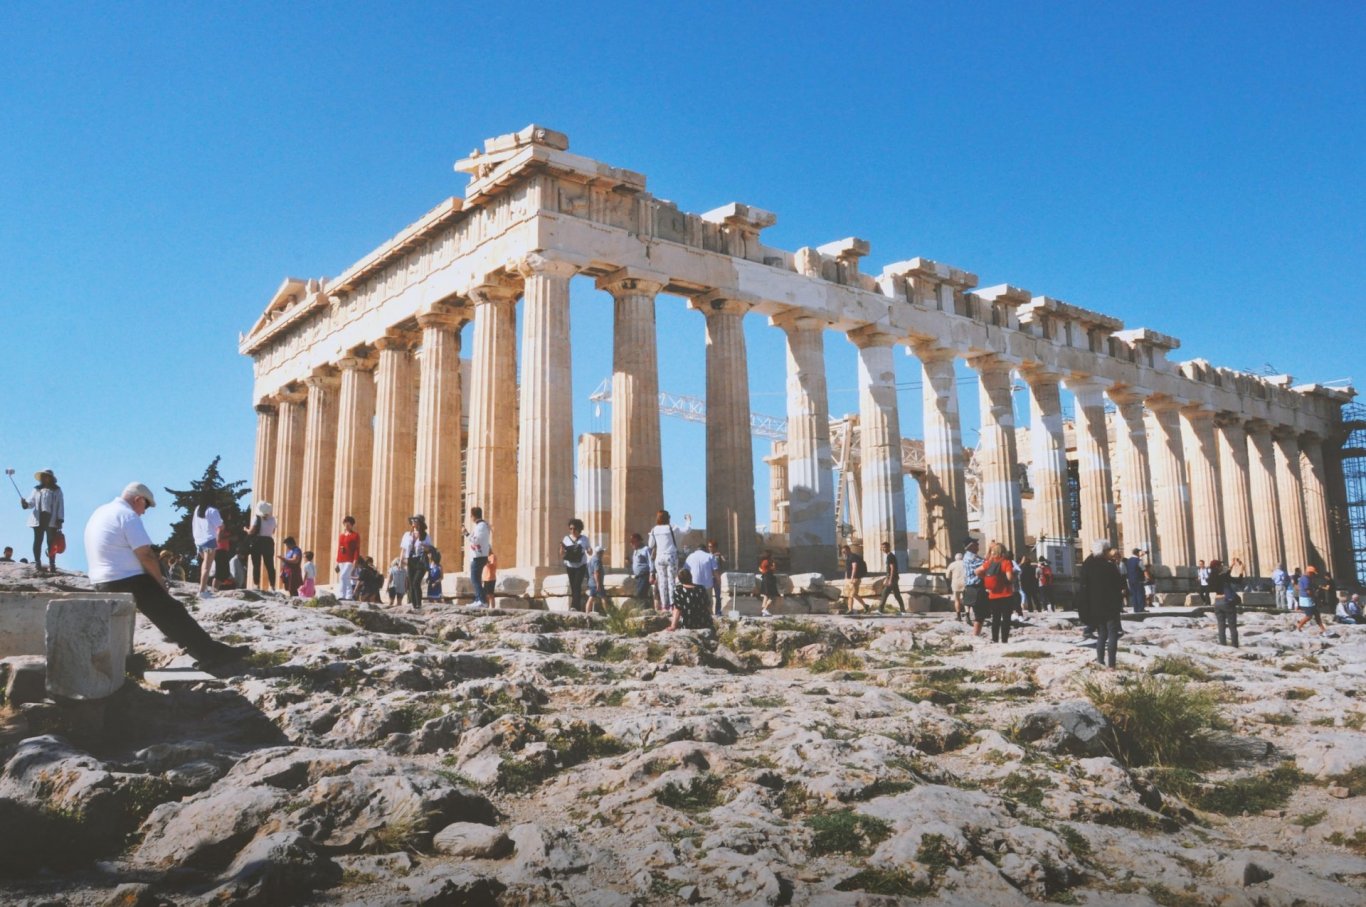 The famous ruins in the city of Athens, Greece